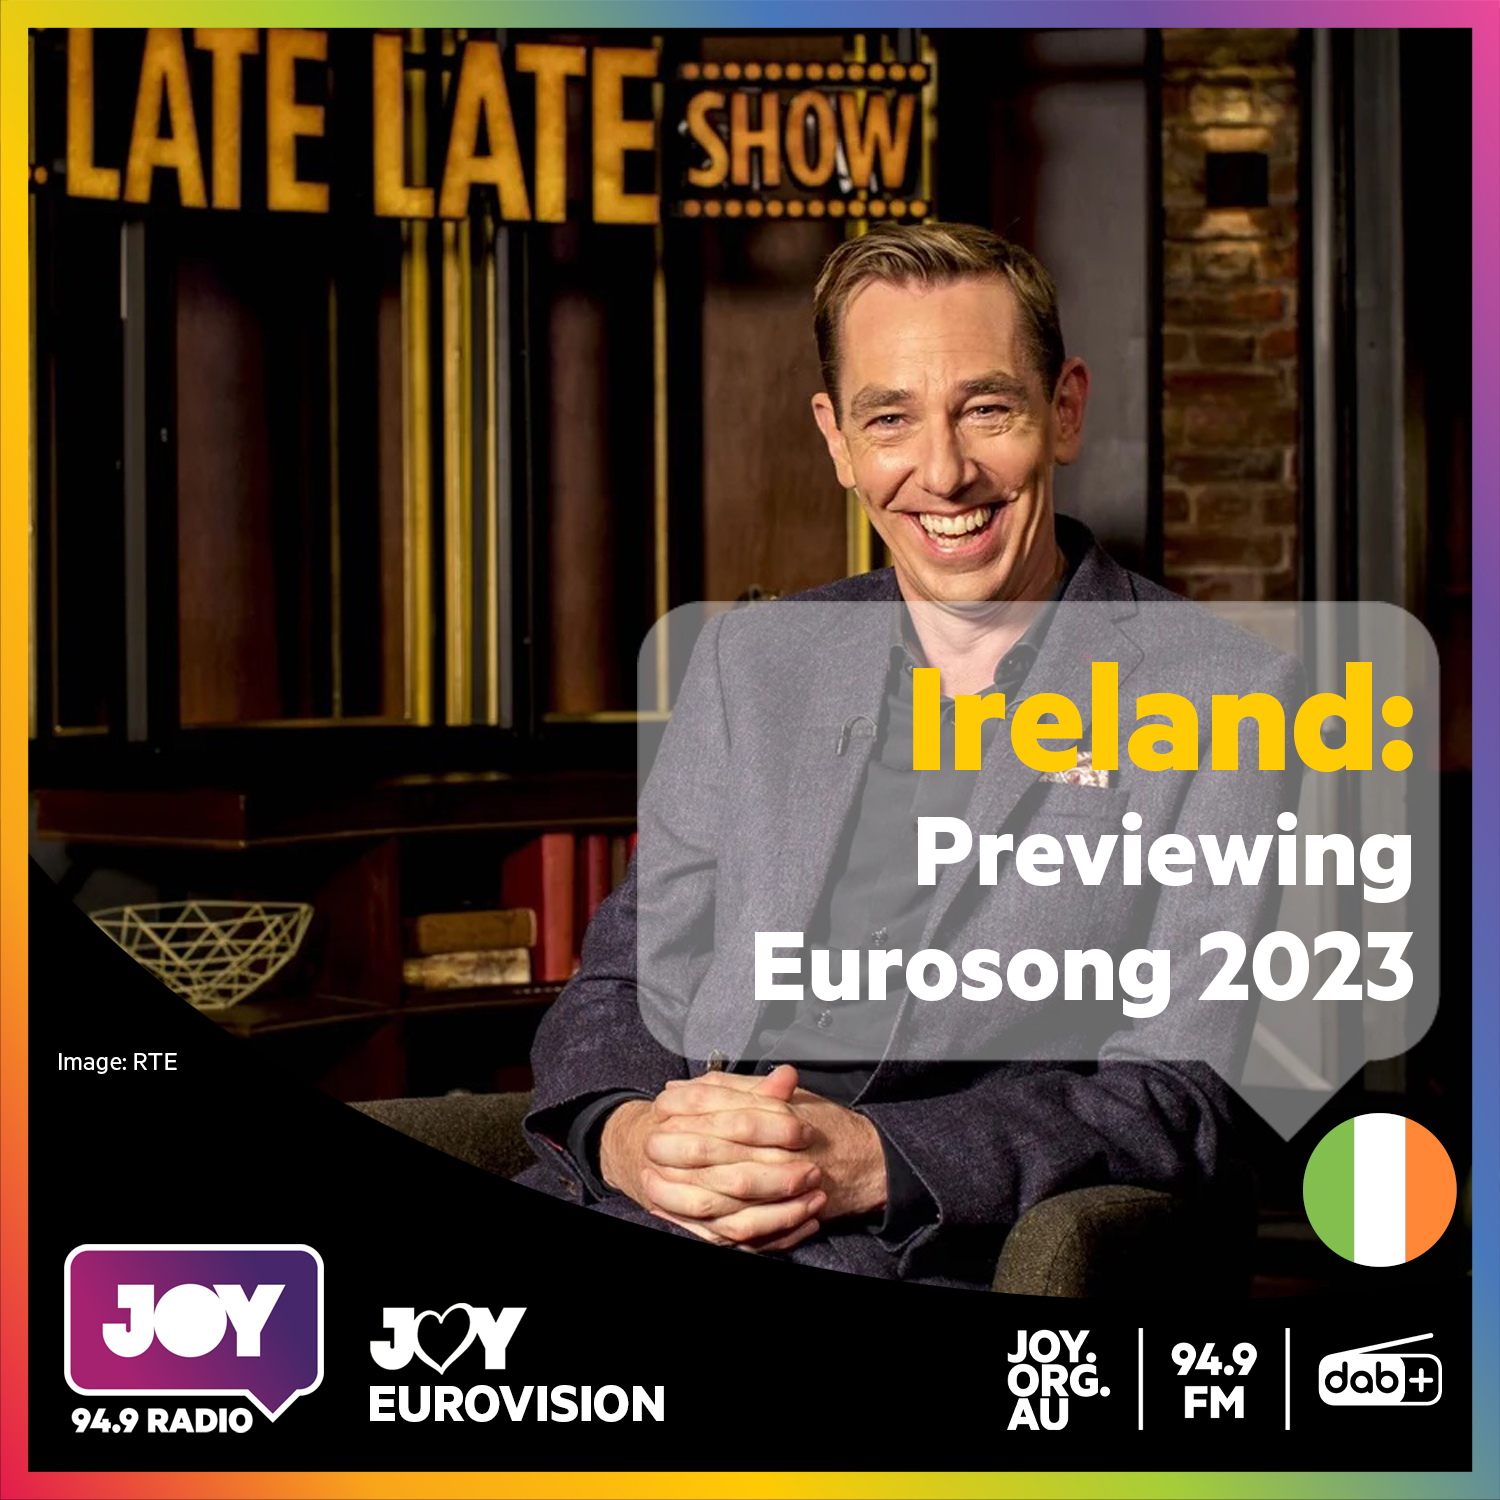 🇮🇪 Previewing Eurosong 2023: Stay up late for Ireland